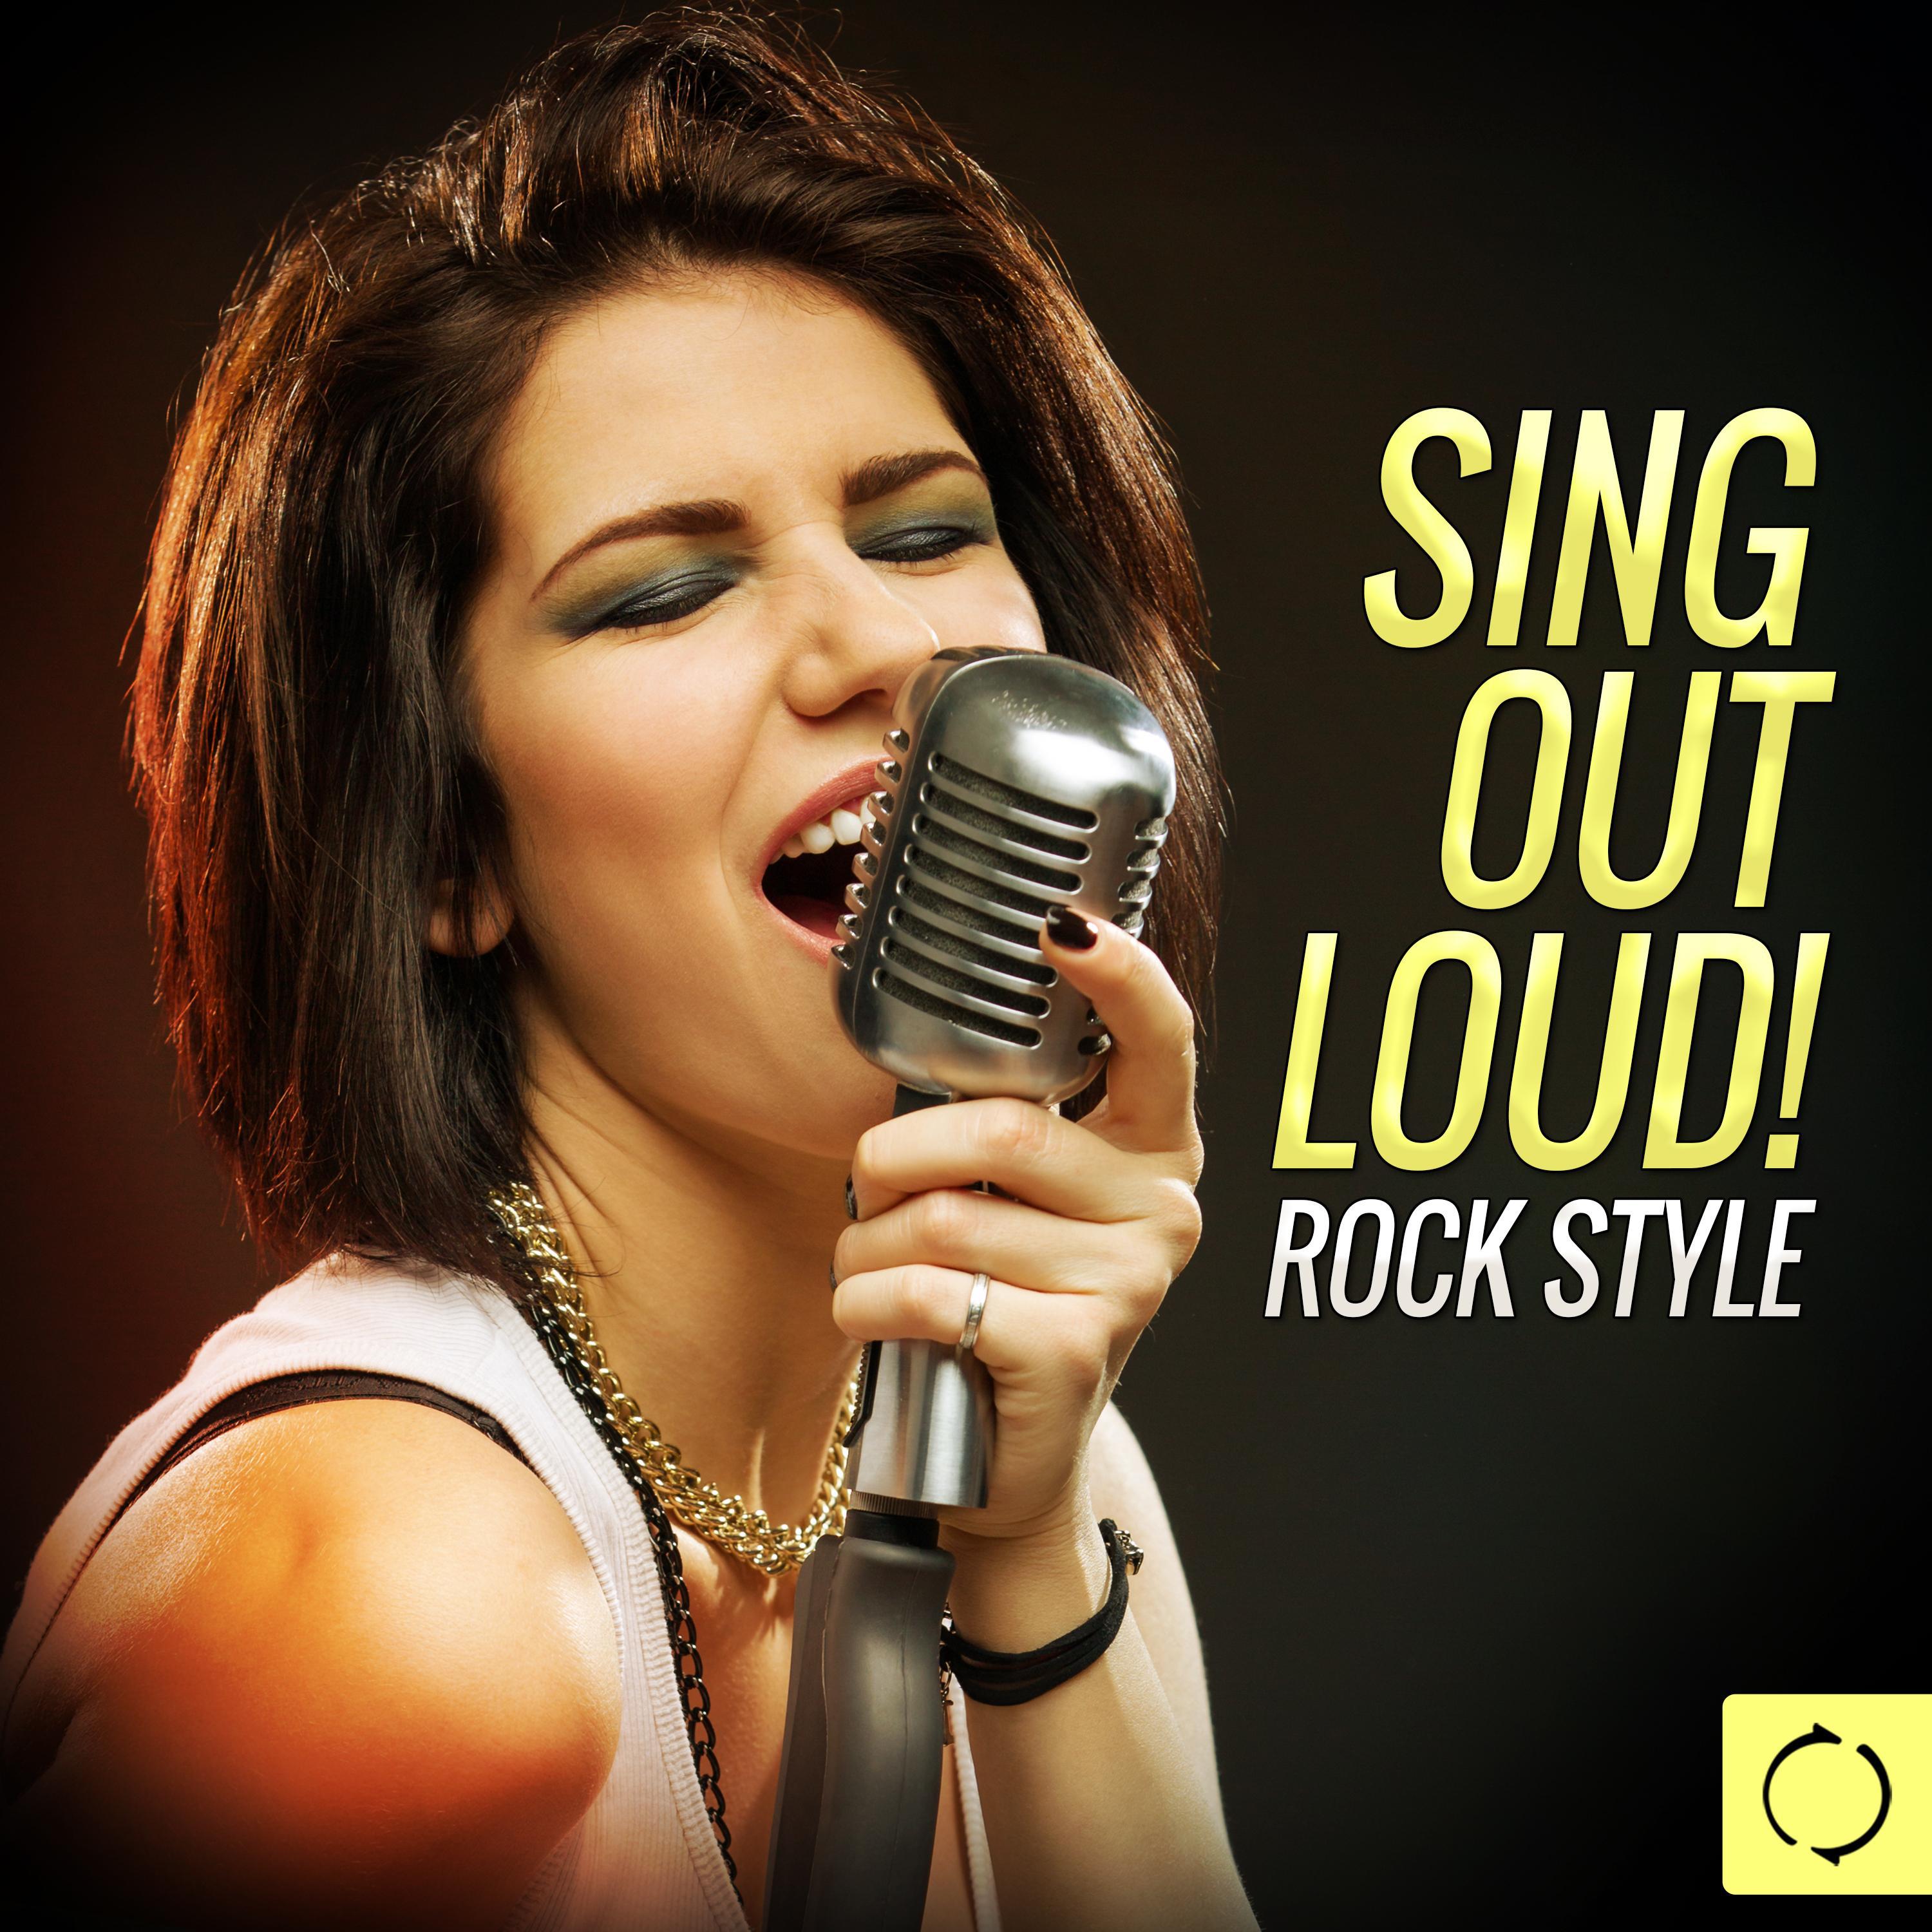 Sing out Loud! Rock Style